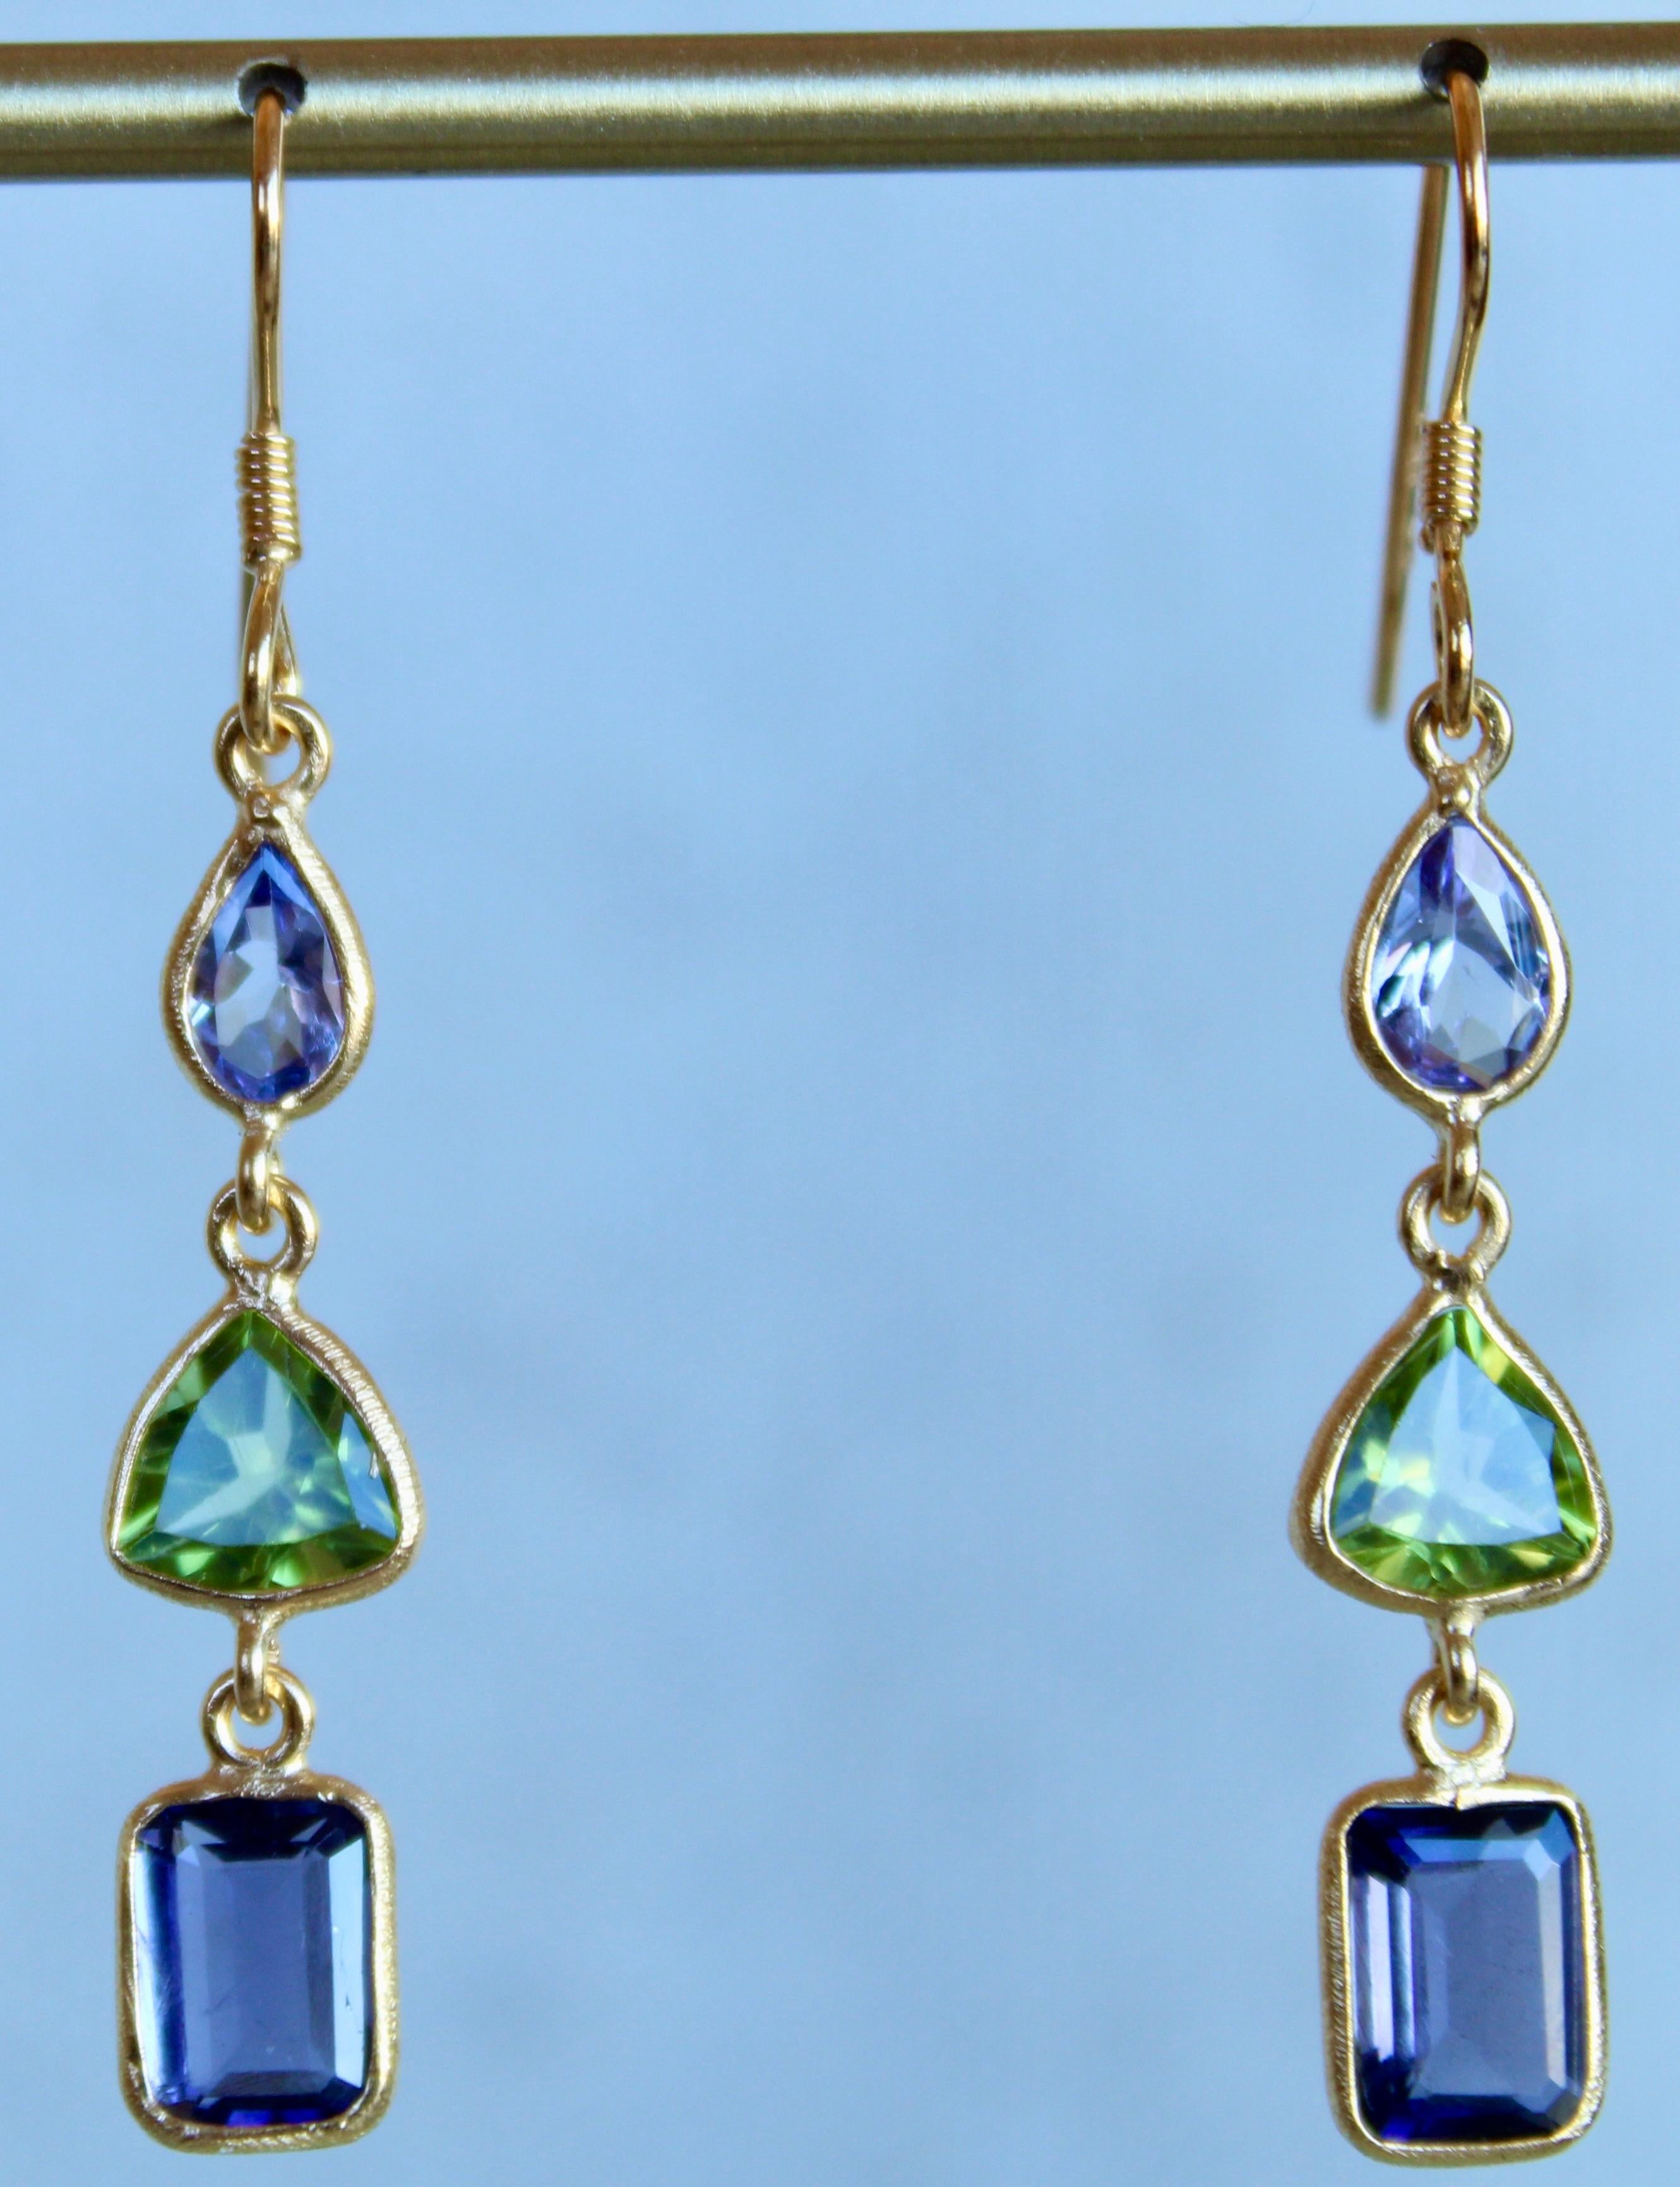 The earrings are comprised of Tanzanite pears, which display rich hues of sky blue, green Peridot trillions and deep navy Iolite emerald cut stones. These earrings are designed to be worn as a pair or as a single. Each gemstone is hand sourced in